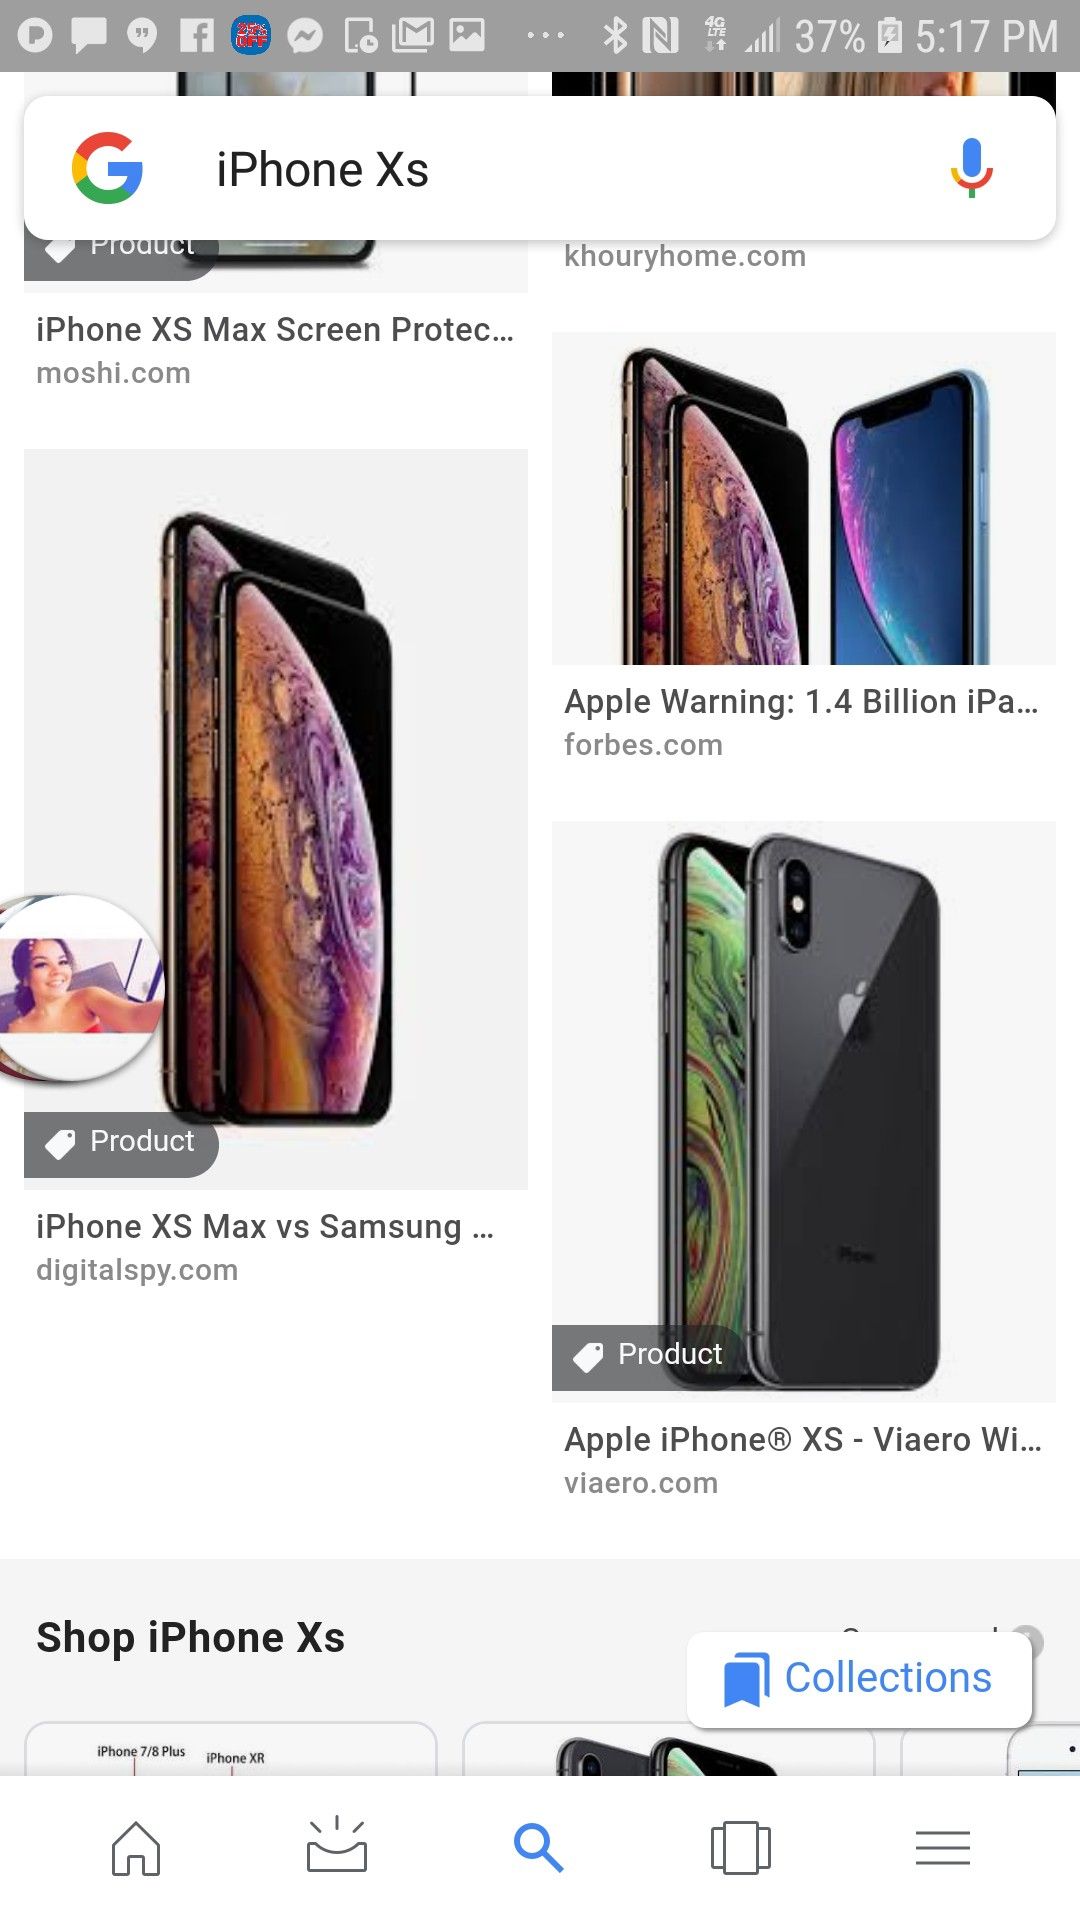 IPhone Xs for sprint